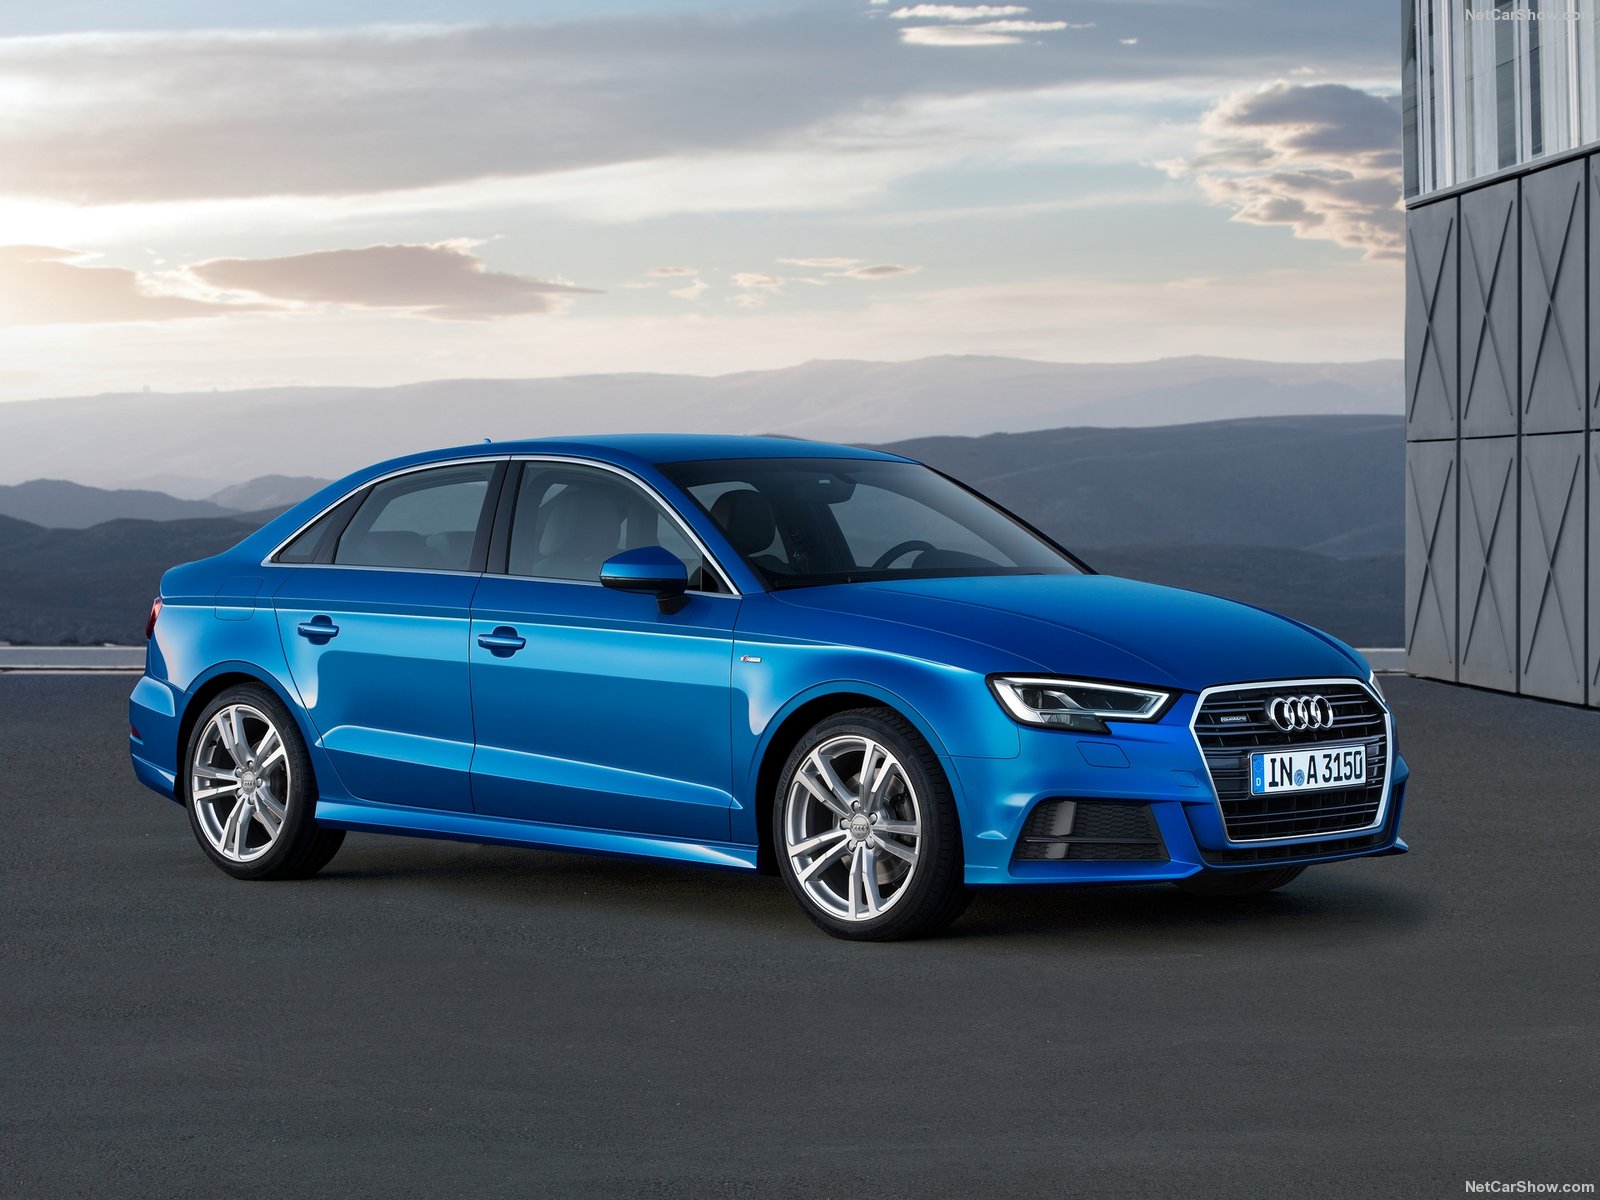 How Much It Cost To Rent Audi A3 In Dubai 